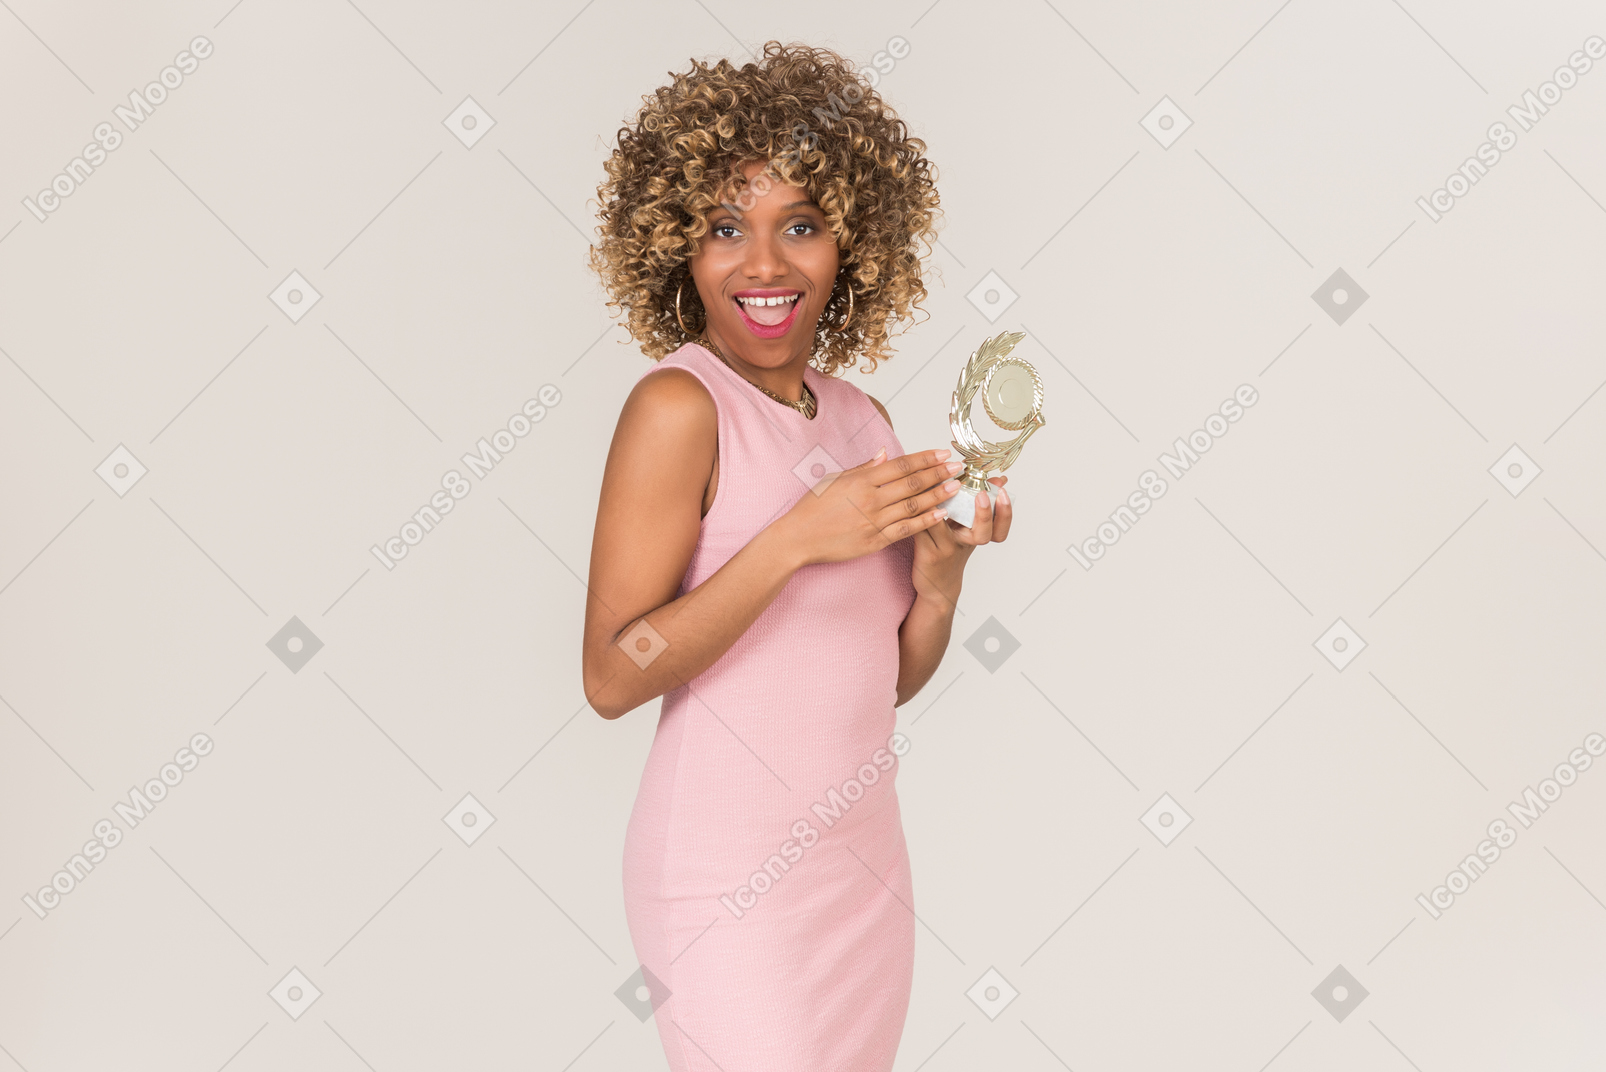 A woman in pink standing with an award